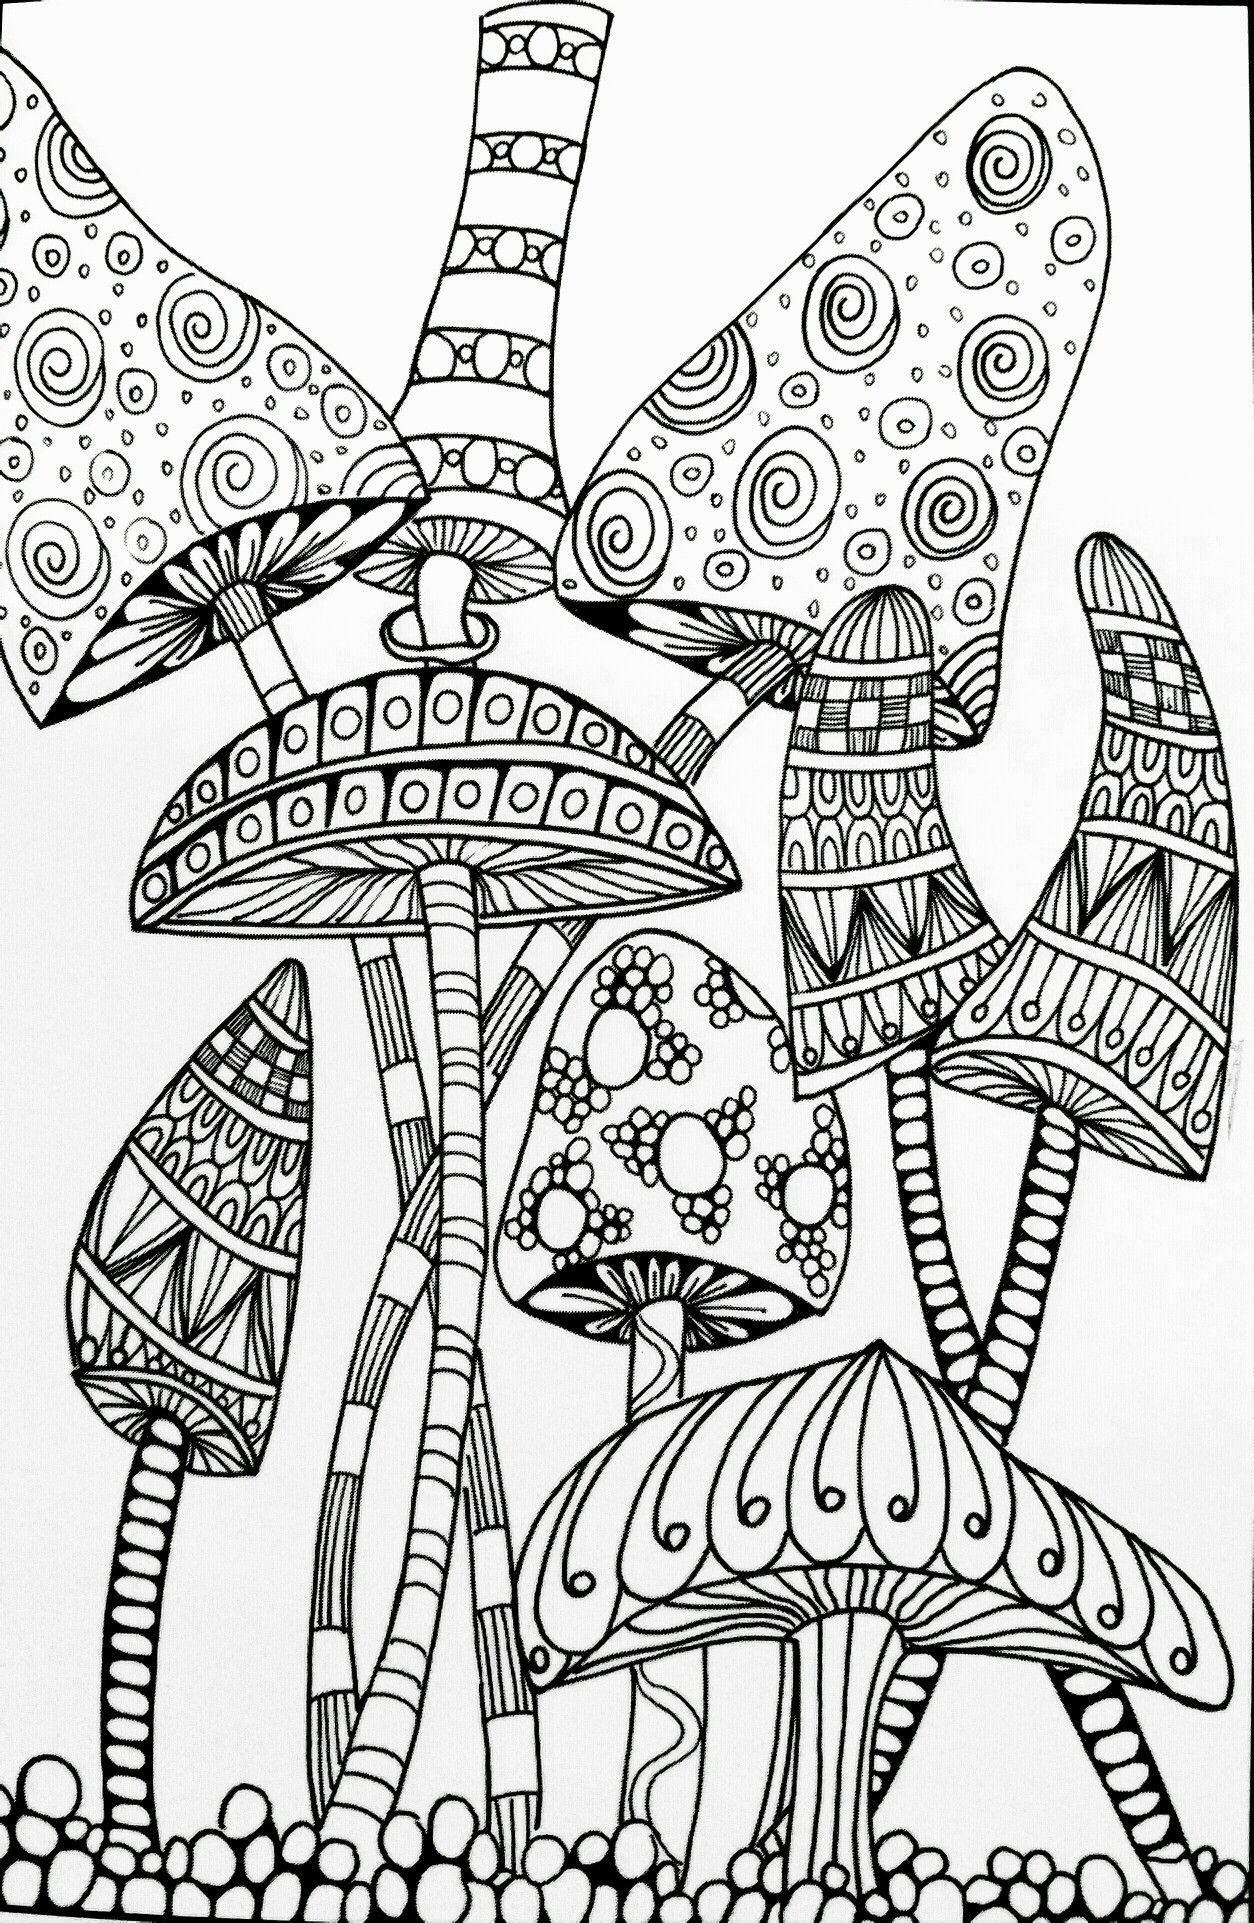 Trippy Mushroom Coloring Pages Free | Free Coloring Books - Free Printable Mushroom Coloring Pages